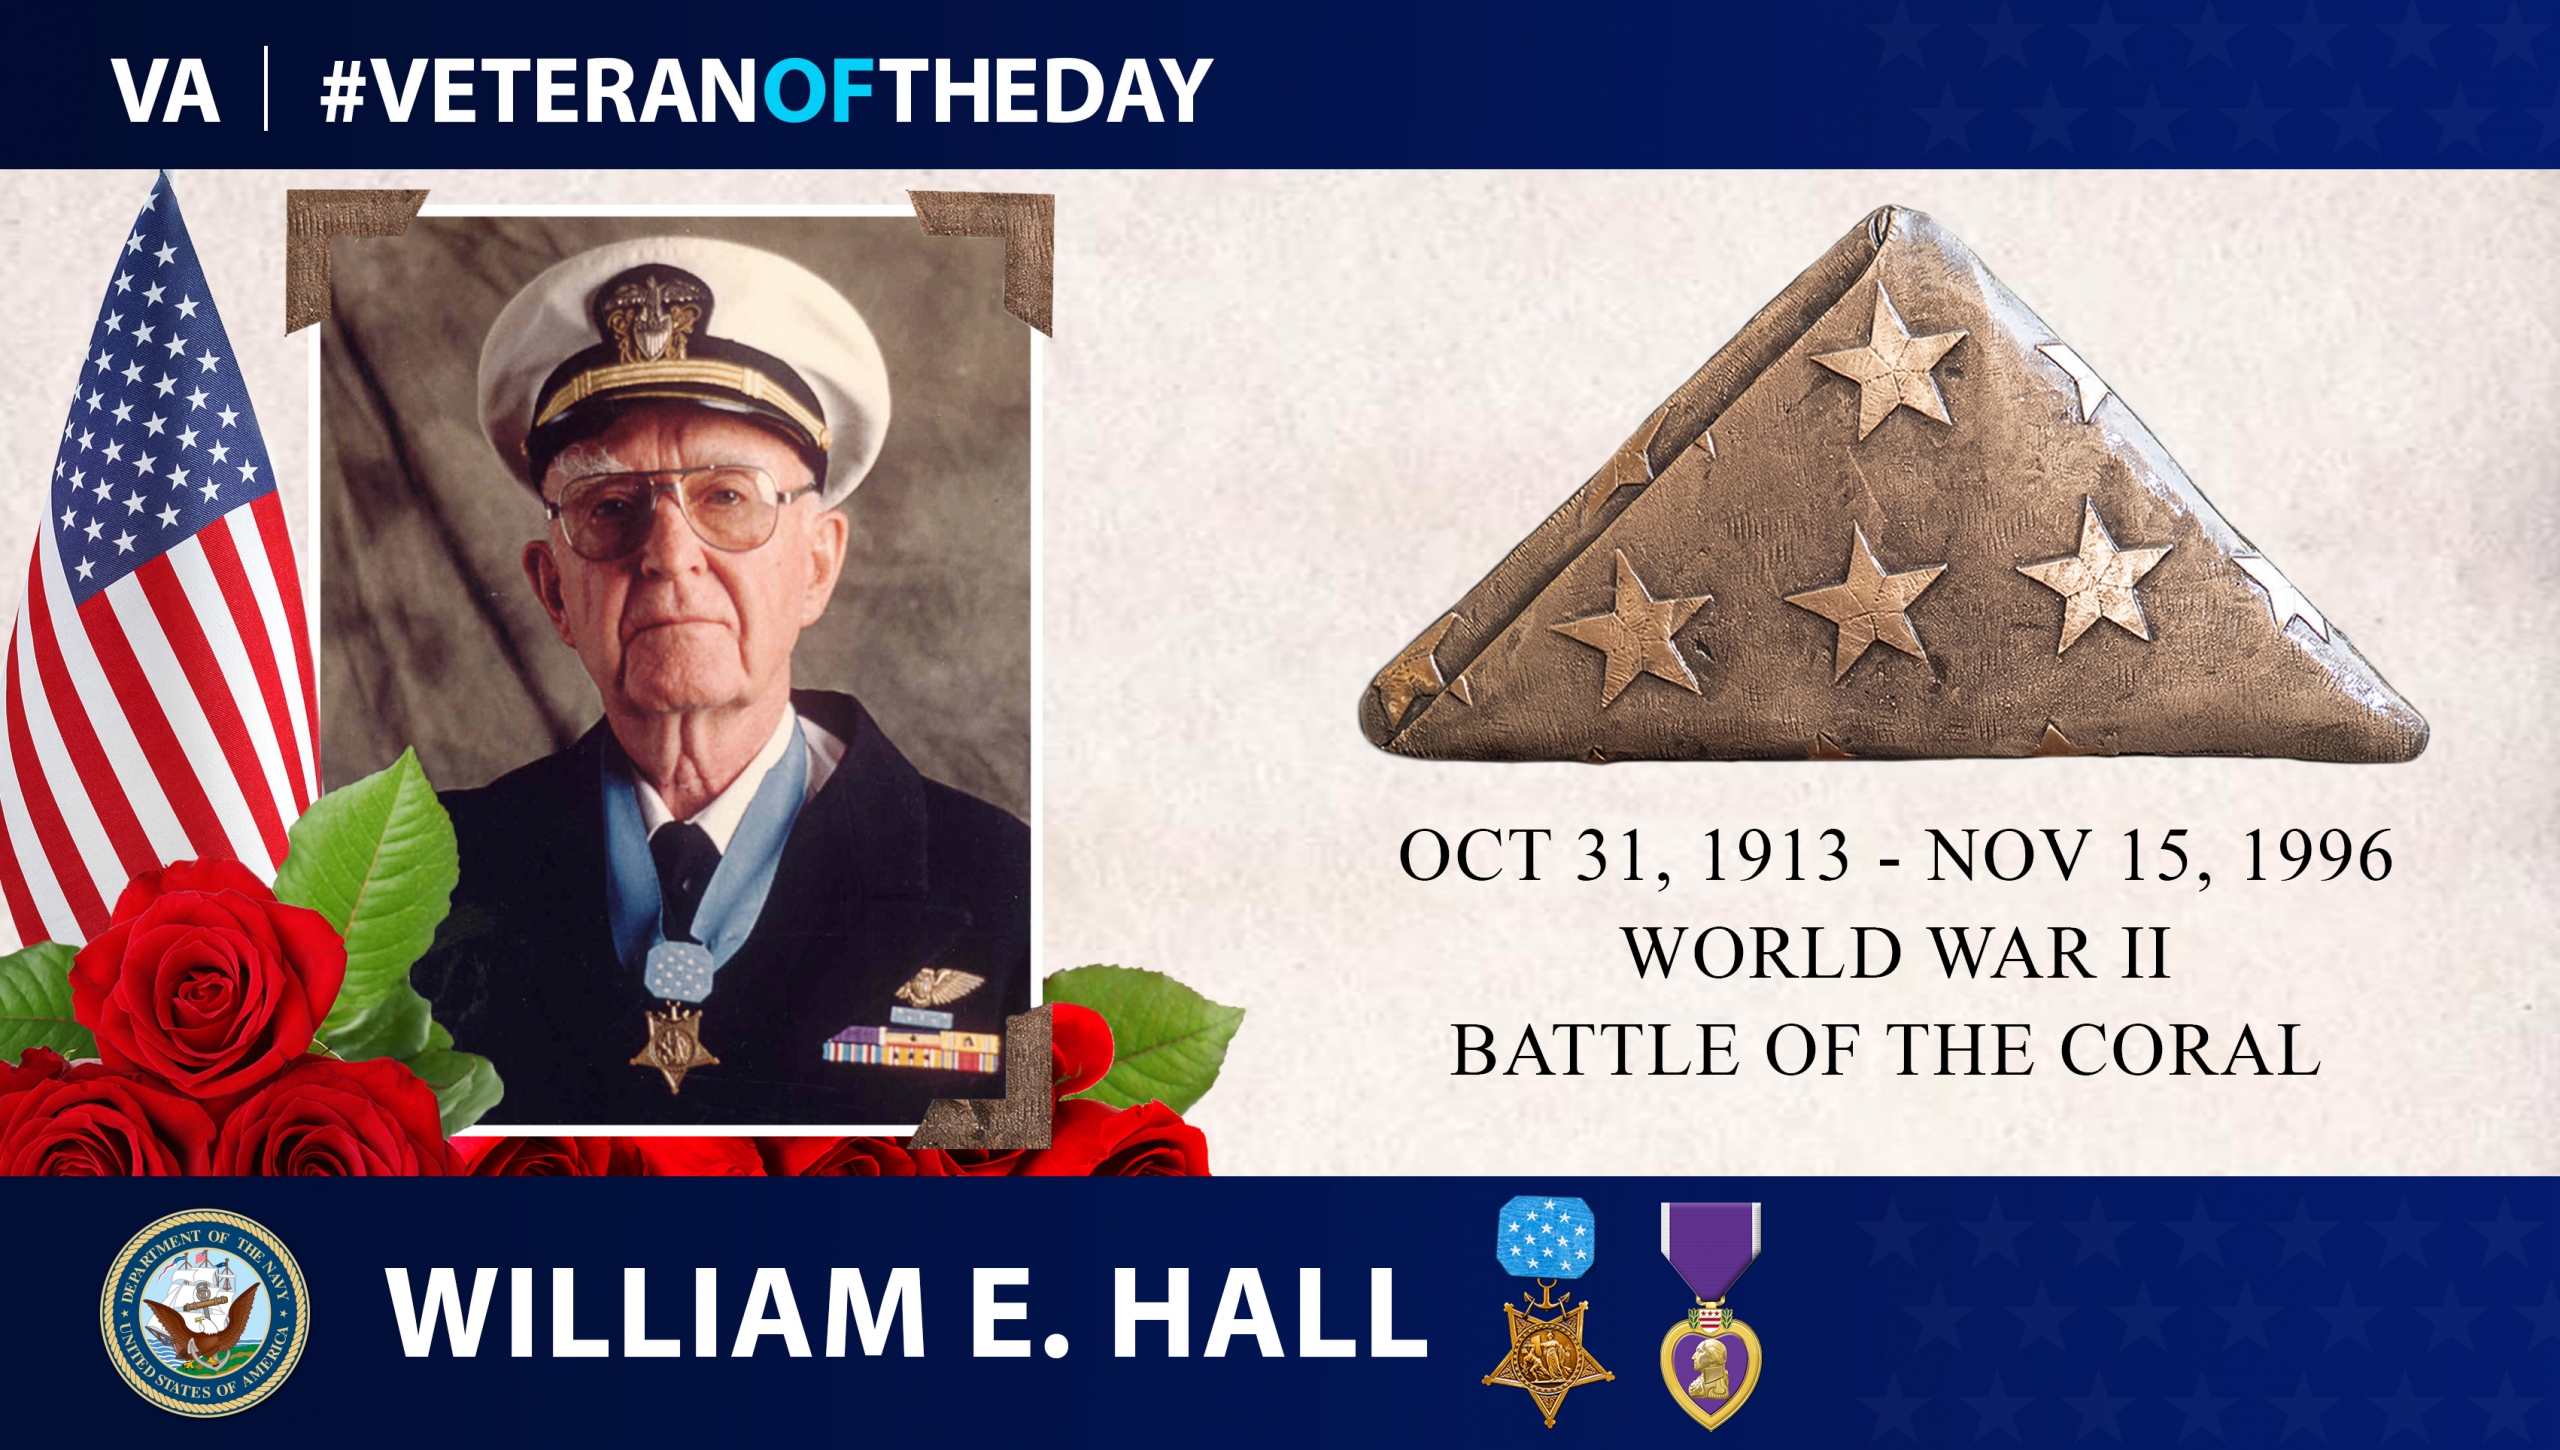 Navy Veteran William Edward Hall is today’s Veteran of the Day.